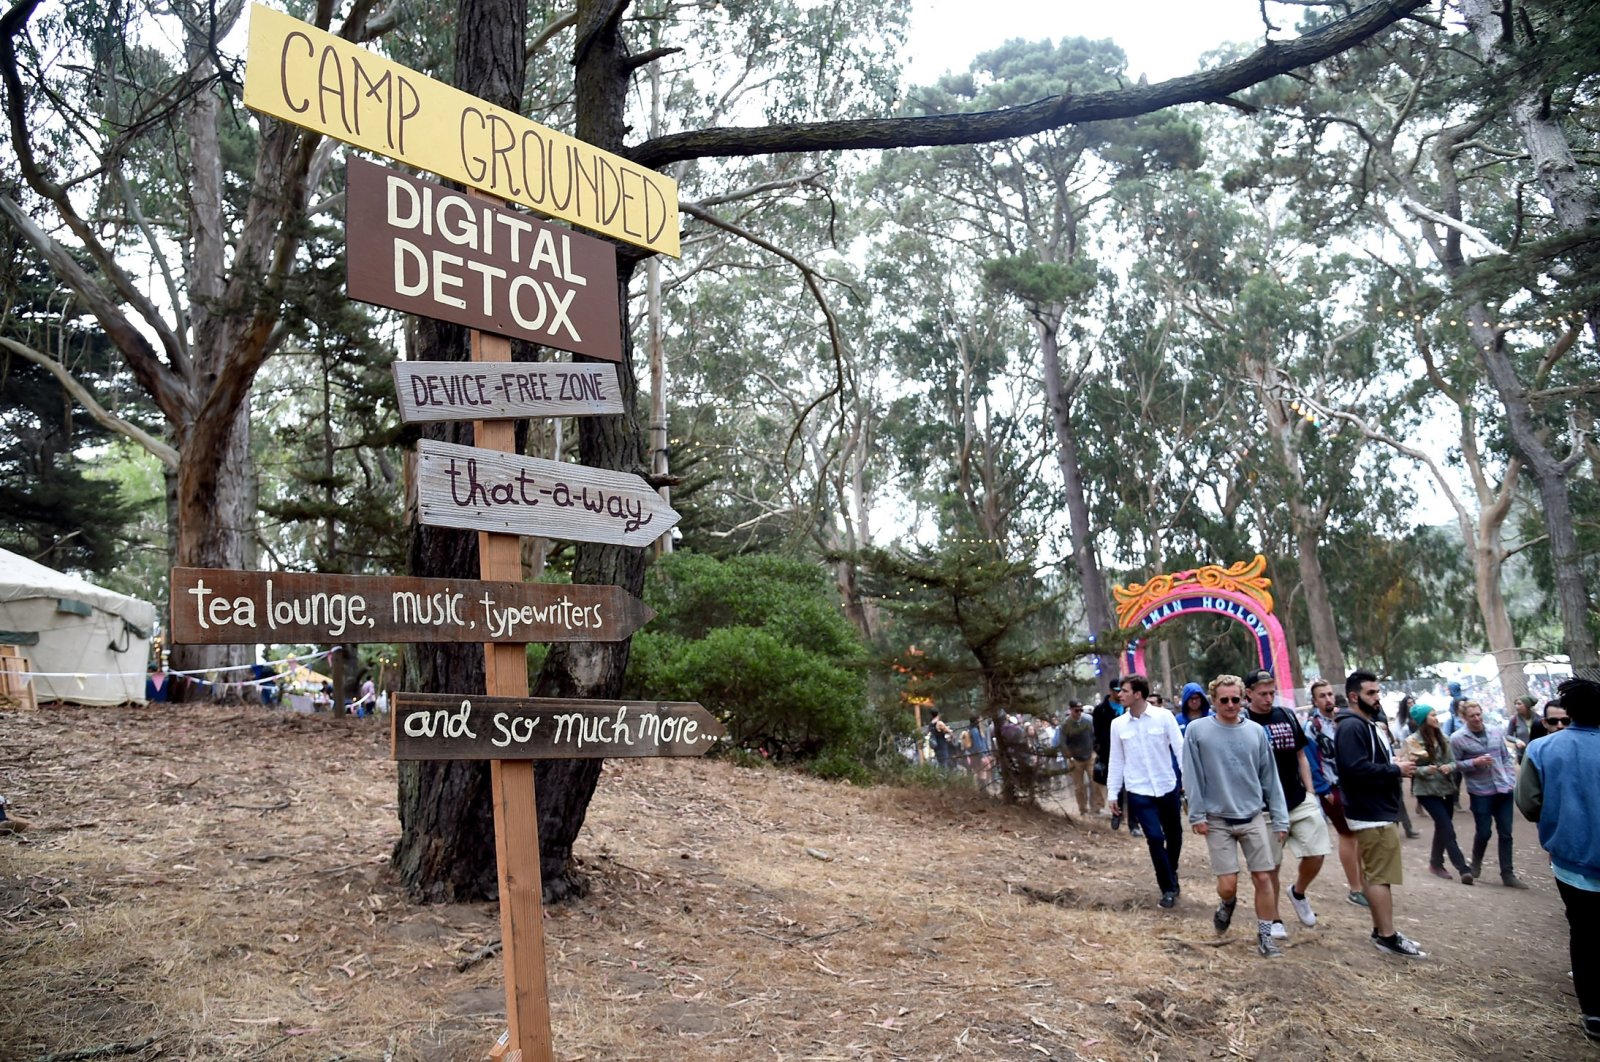 Digital Detox: Analog Zone can be seen during Outside Lands Music and Arts Festival at Golden Gate Park in San Francisco, California, U.S., Aug. 9, 2021. (Getty Images)